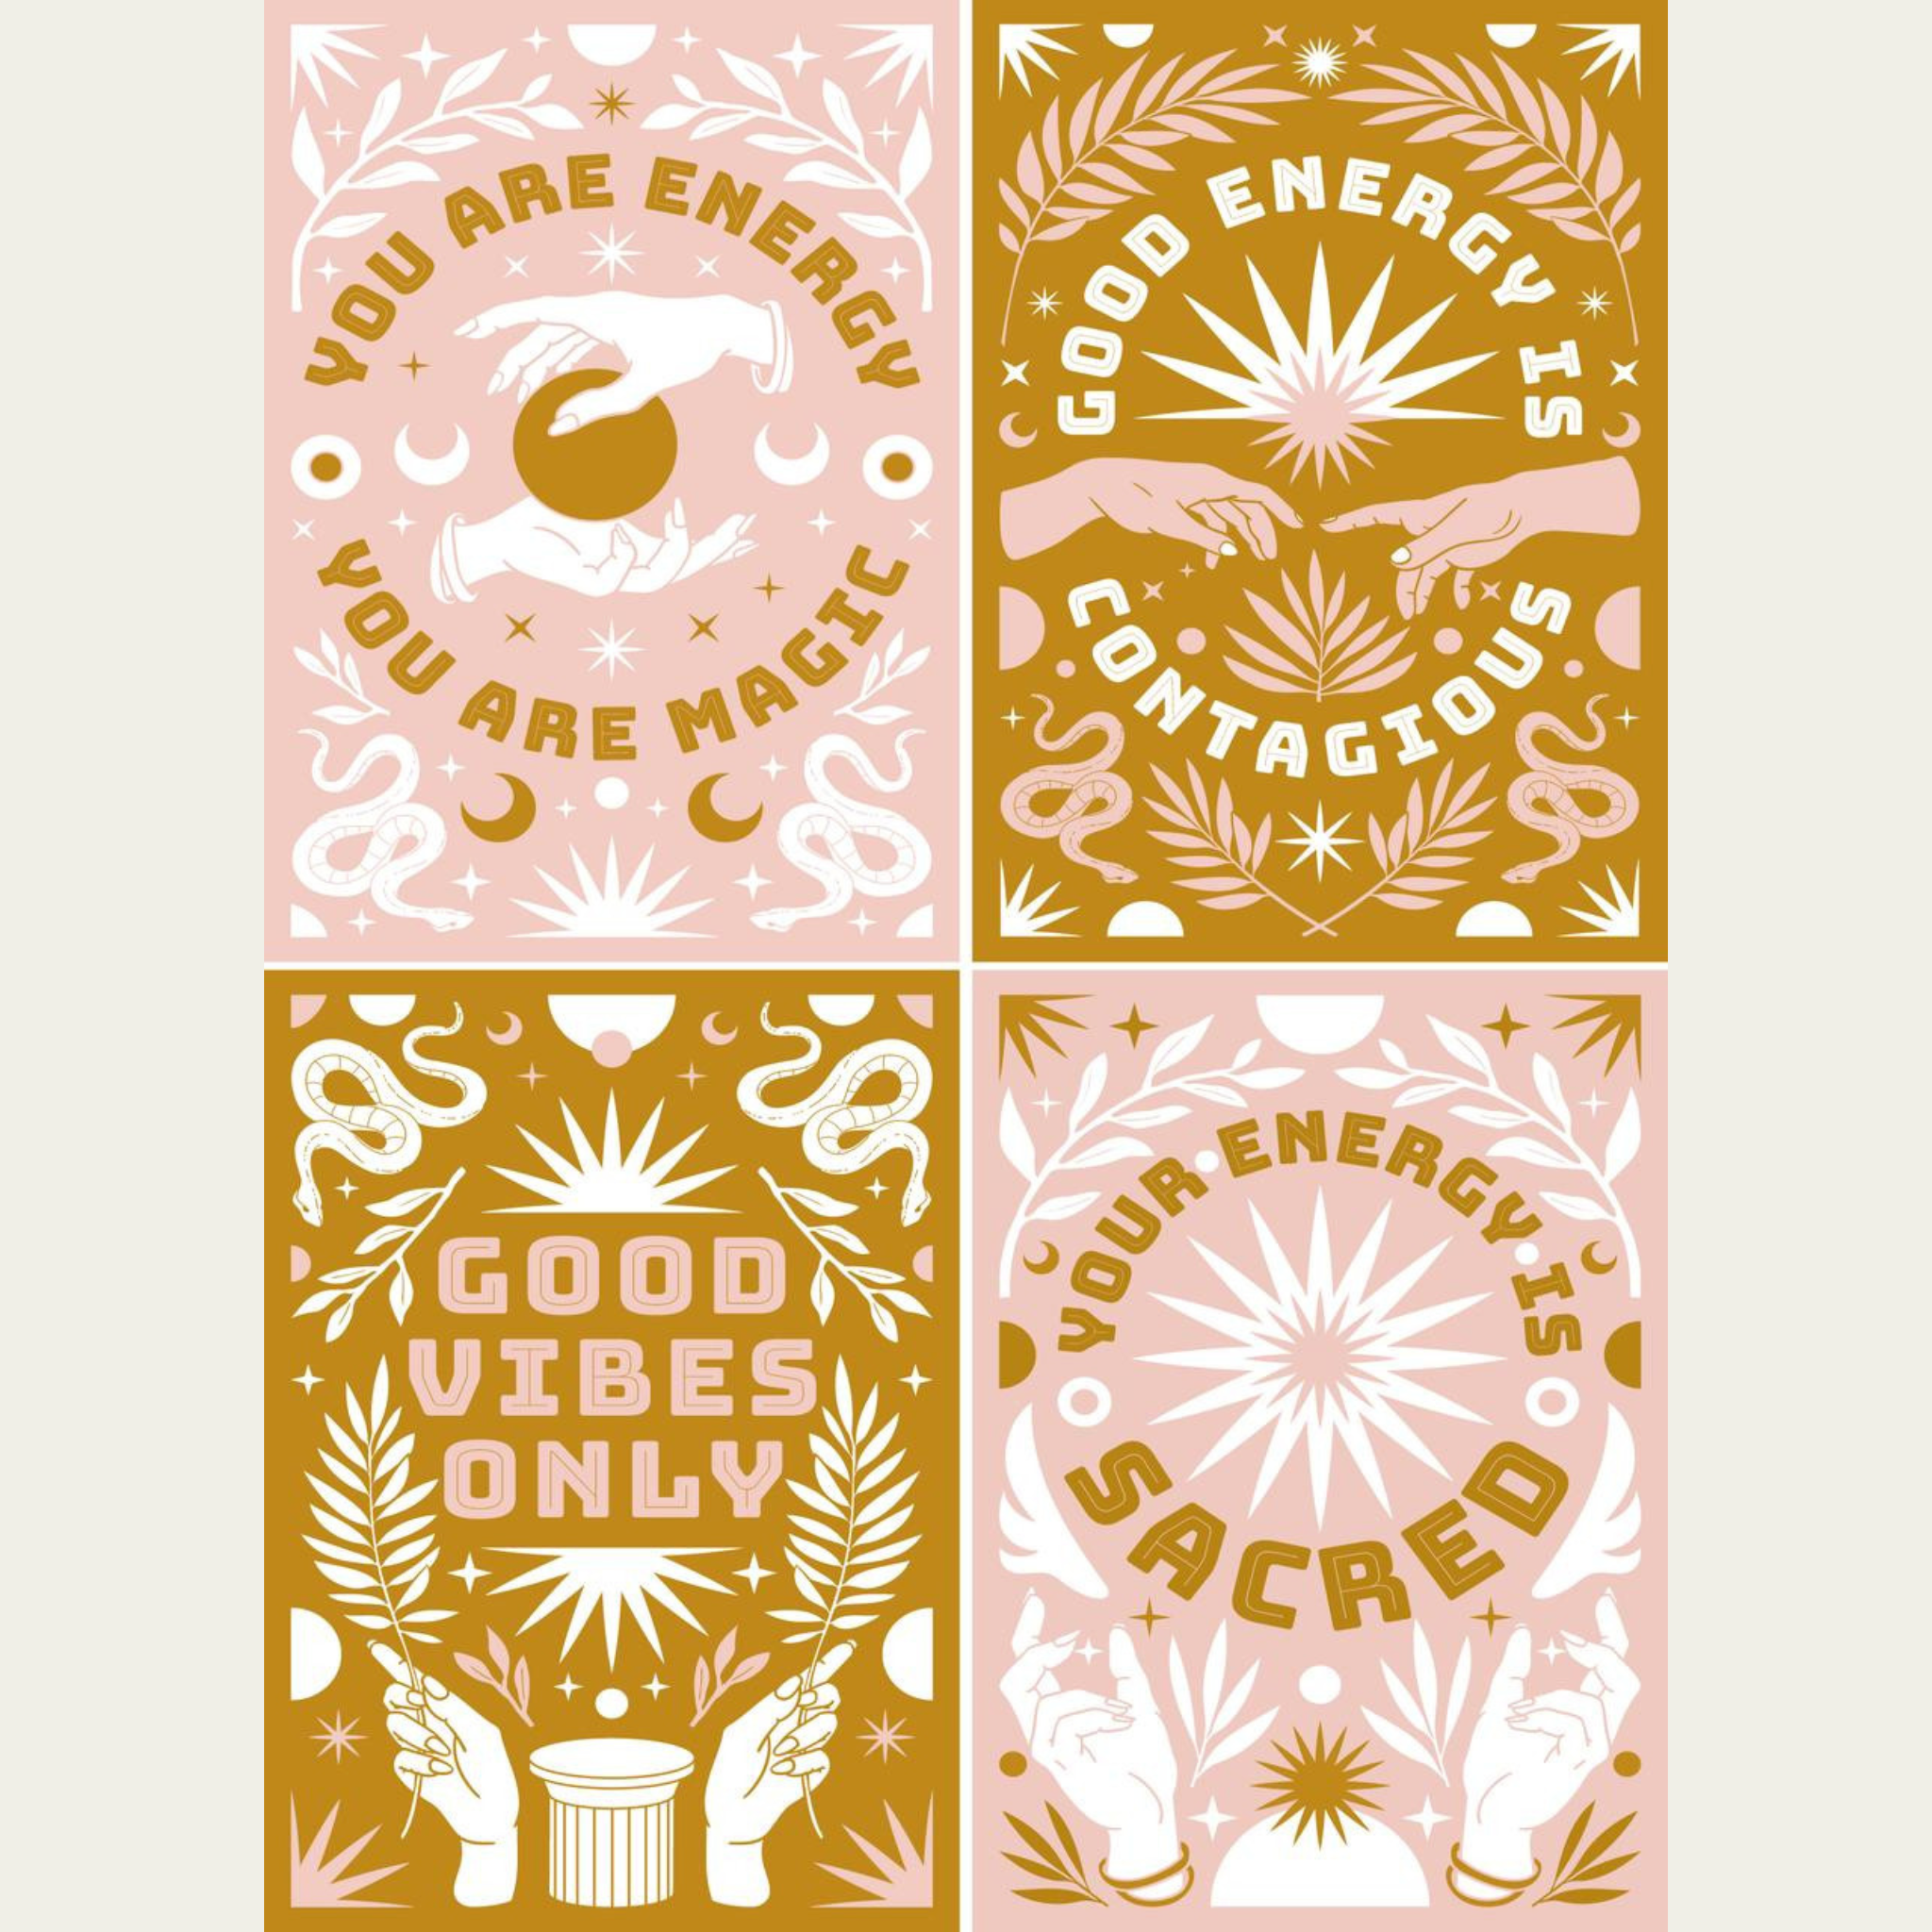 Decoupage paper features 4 designs in light pink and dark mustard feature positive energy quotes and pairs of hands.